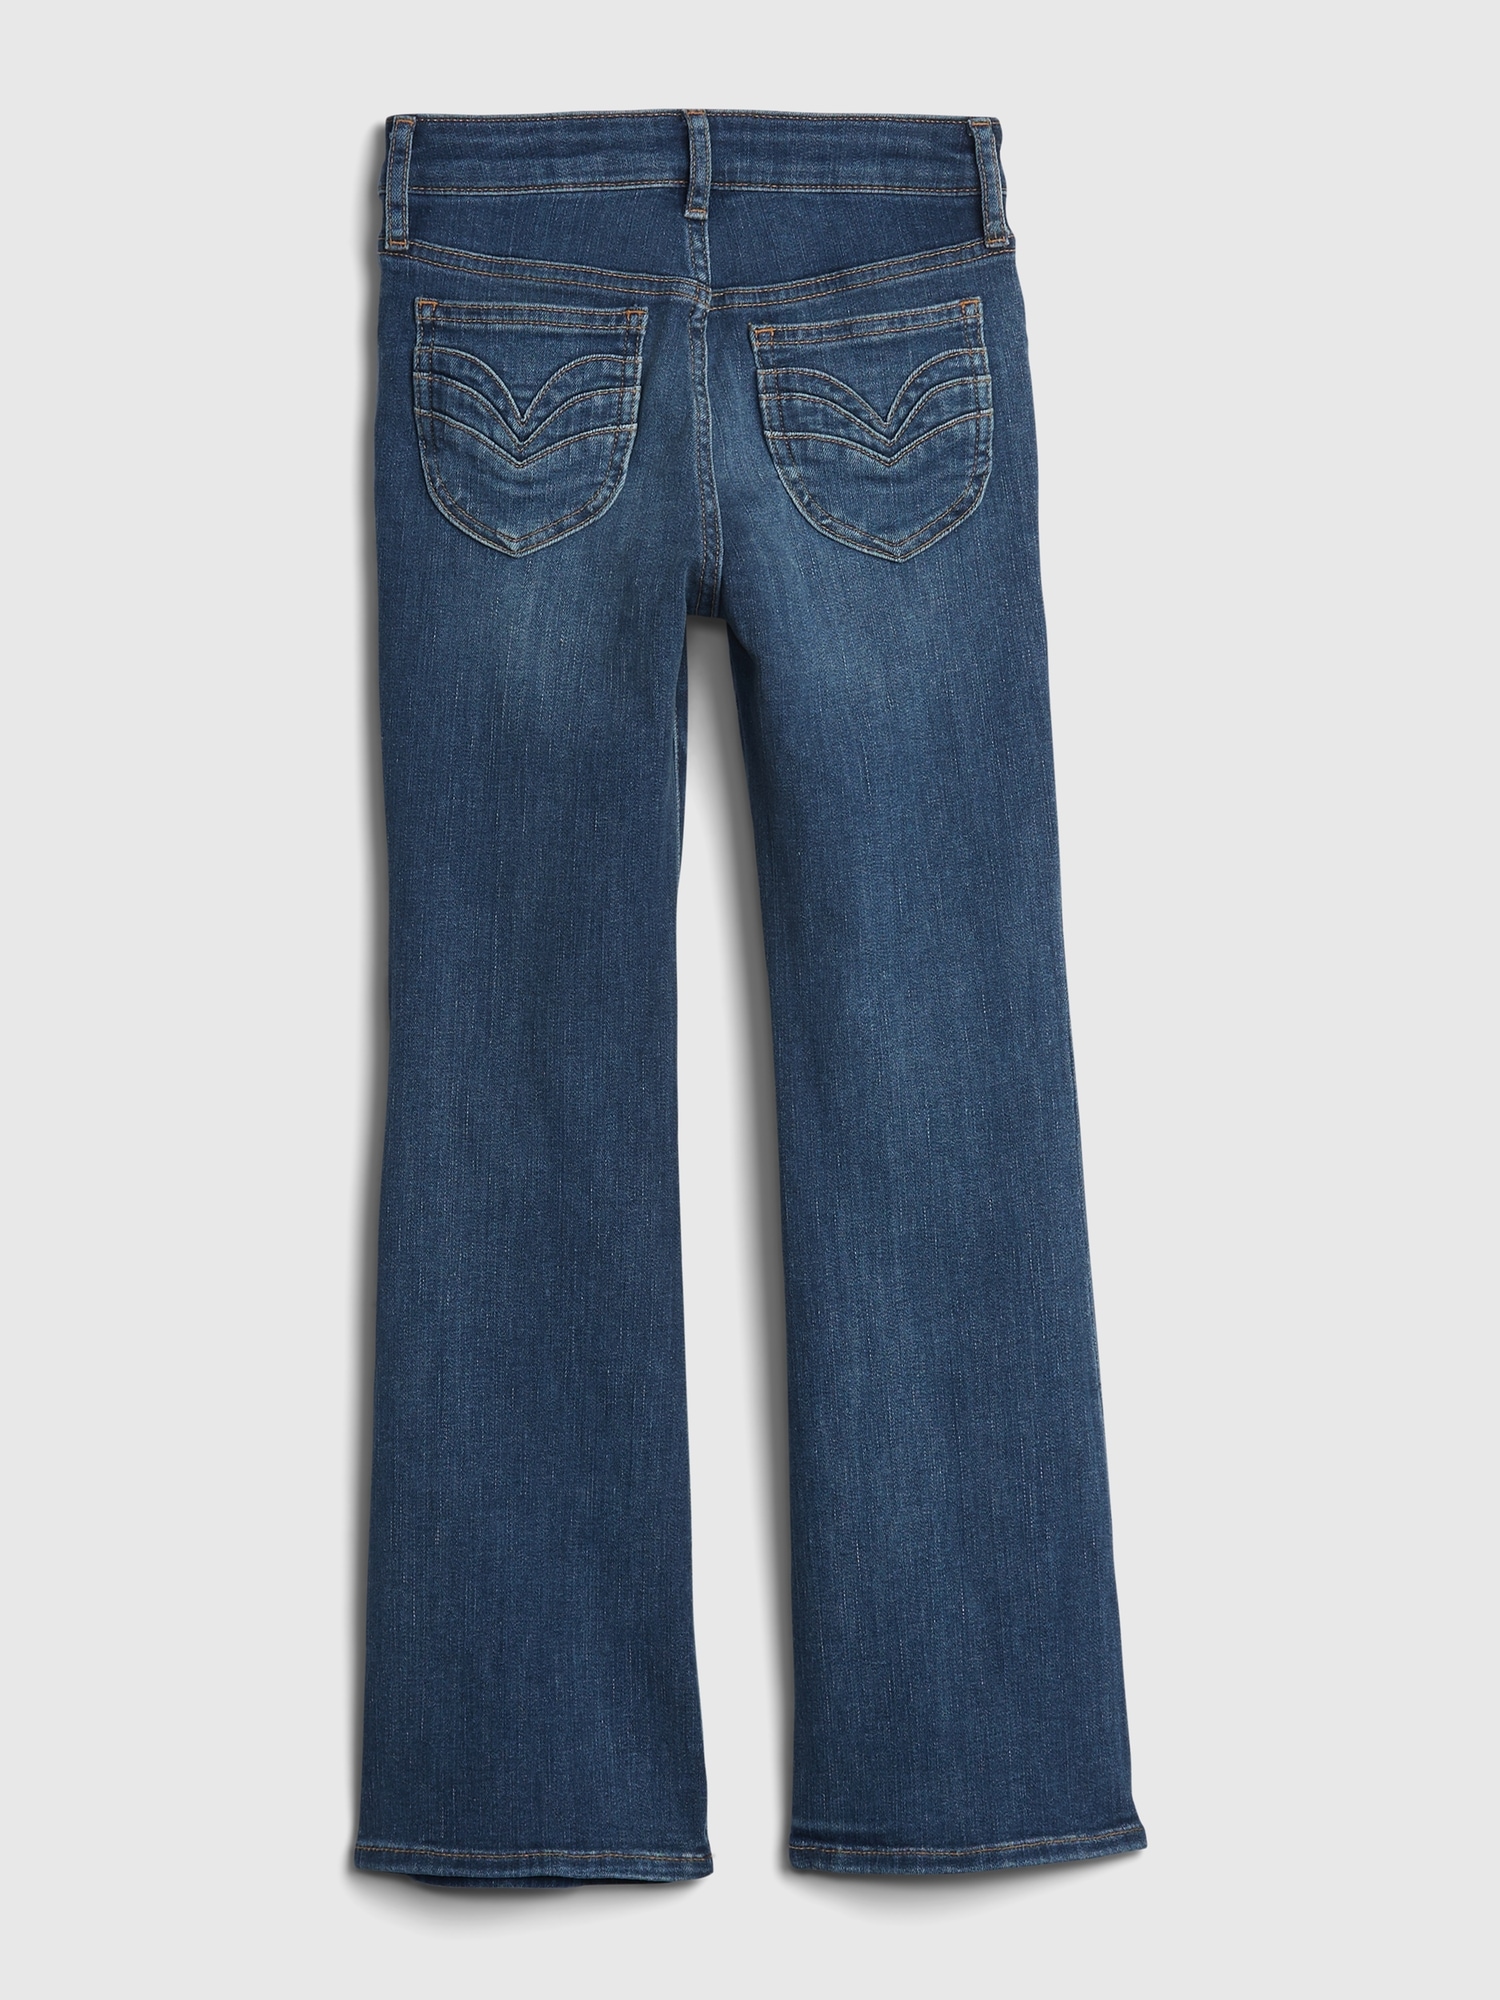 Buy Gap High Waisted Flare Stretch Denim Jeans (4-16yrs) from the Gap  online shop